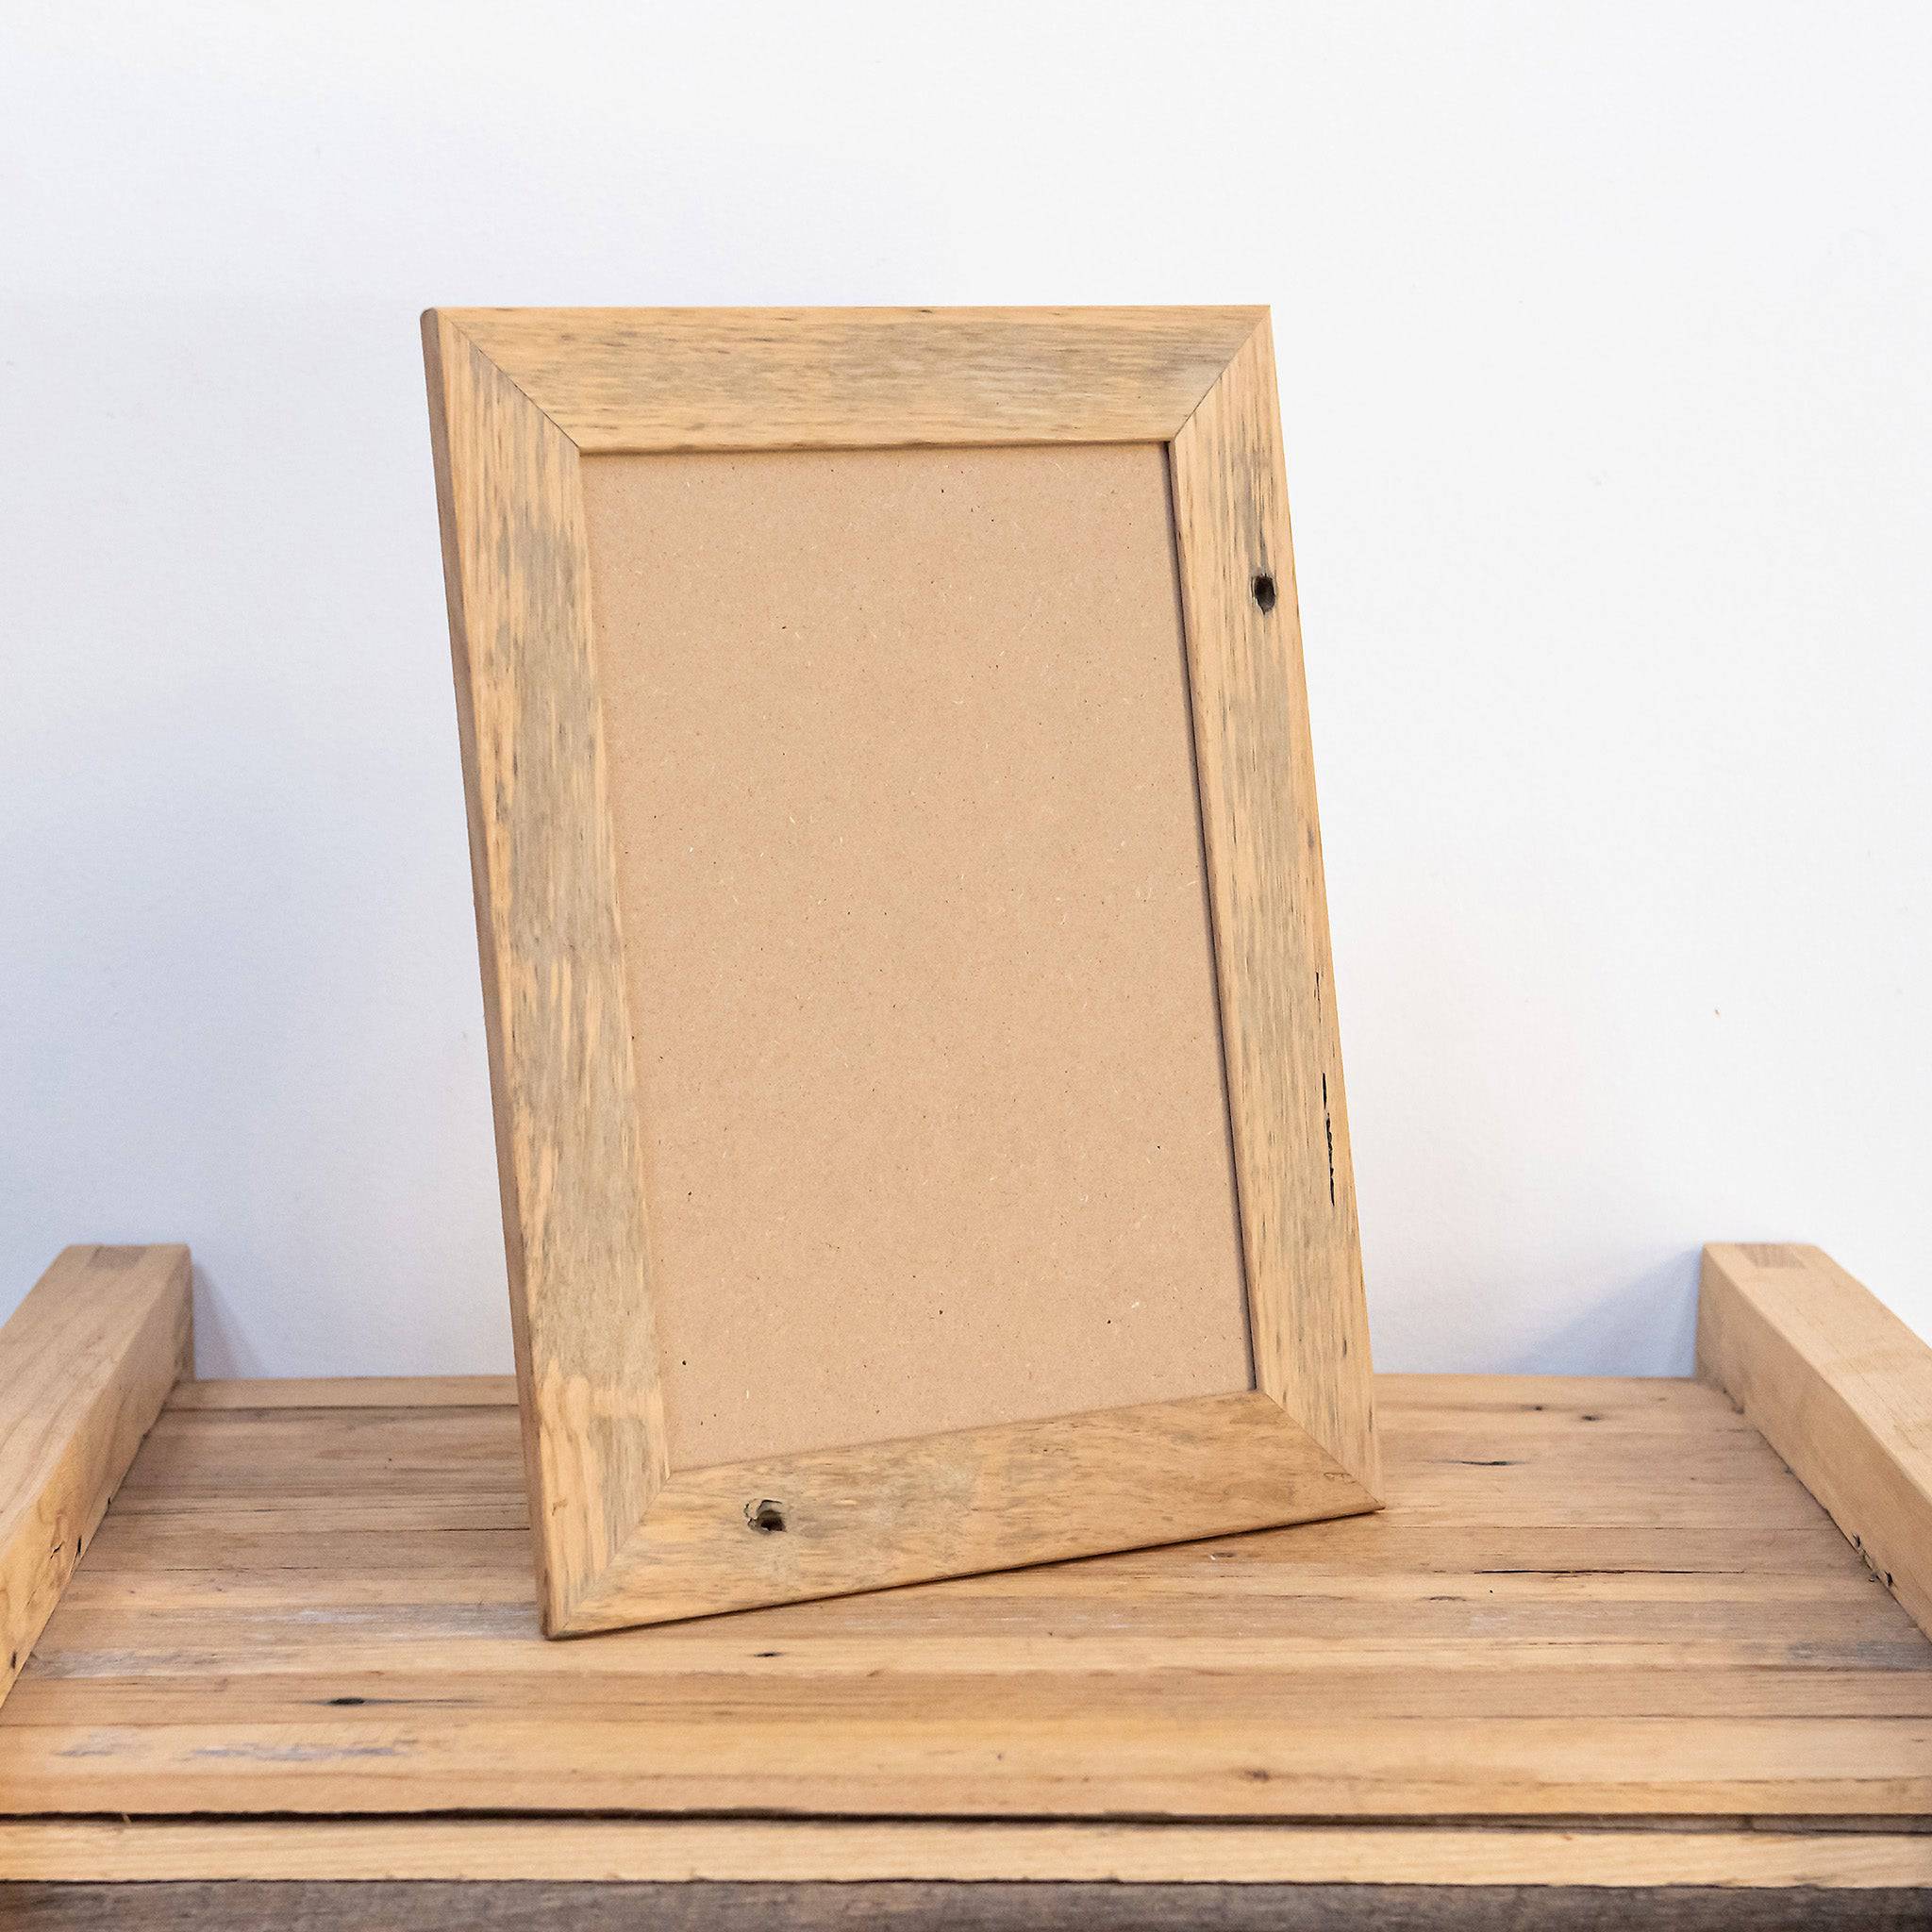 Free standing light wood wallnut colour picture frames on desk. 